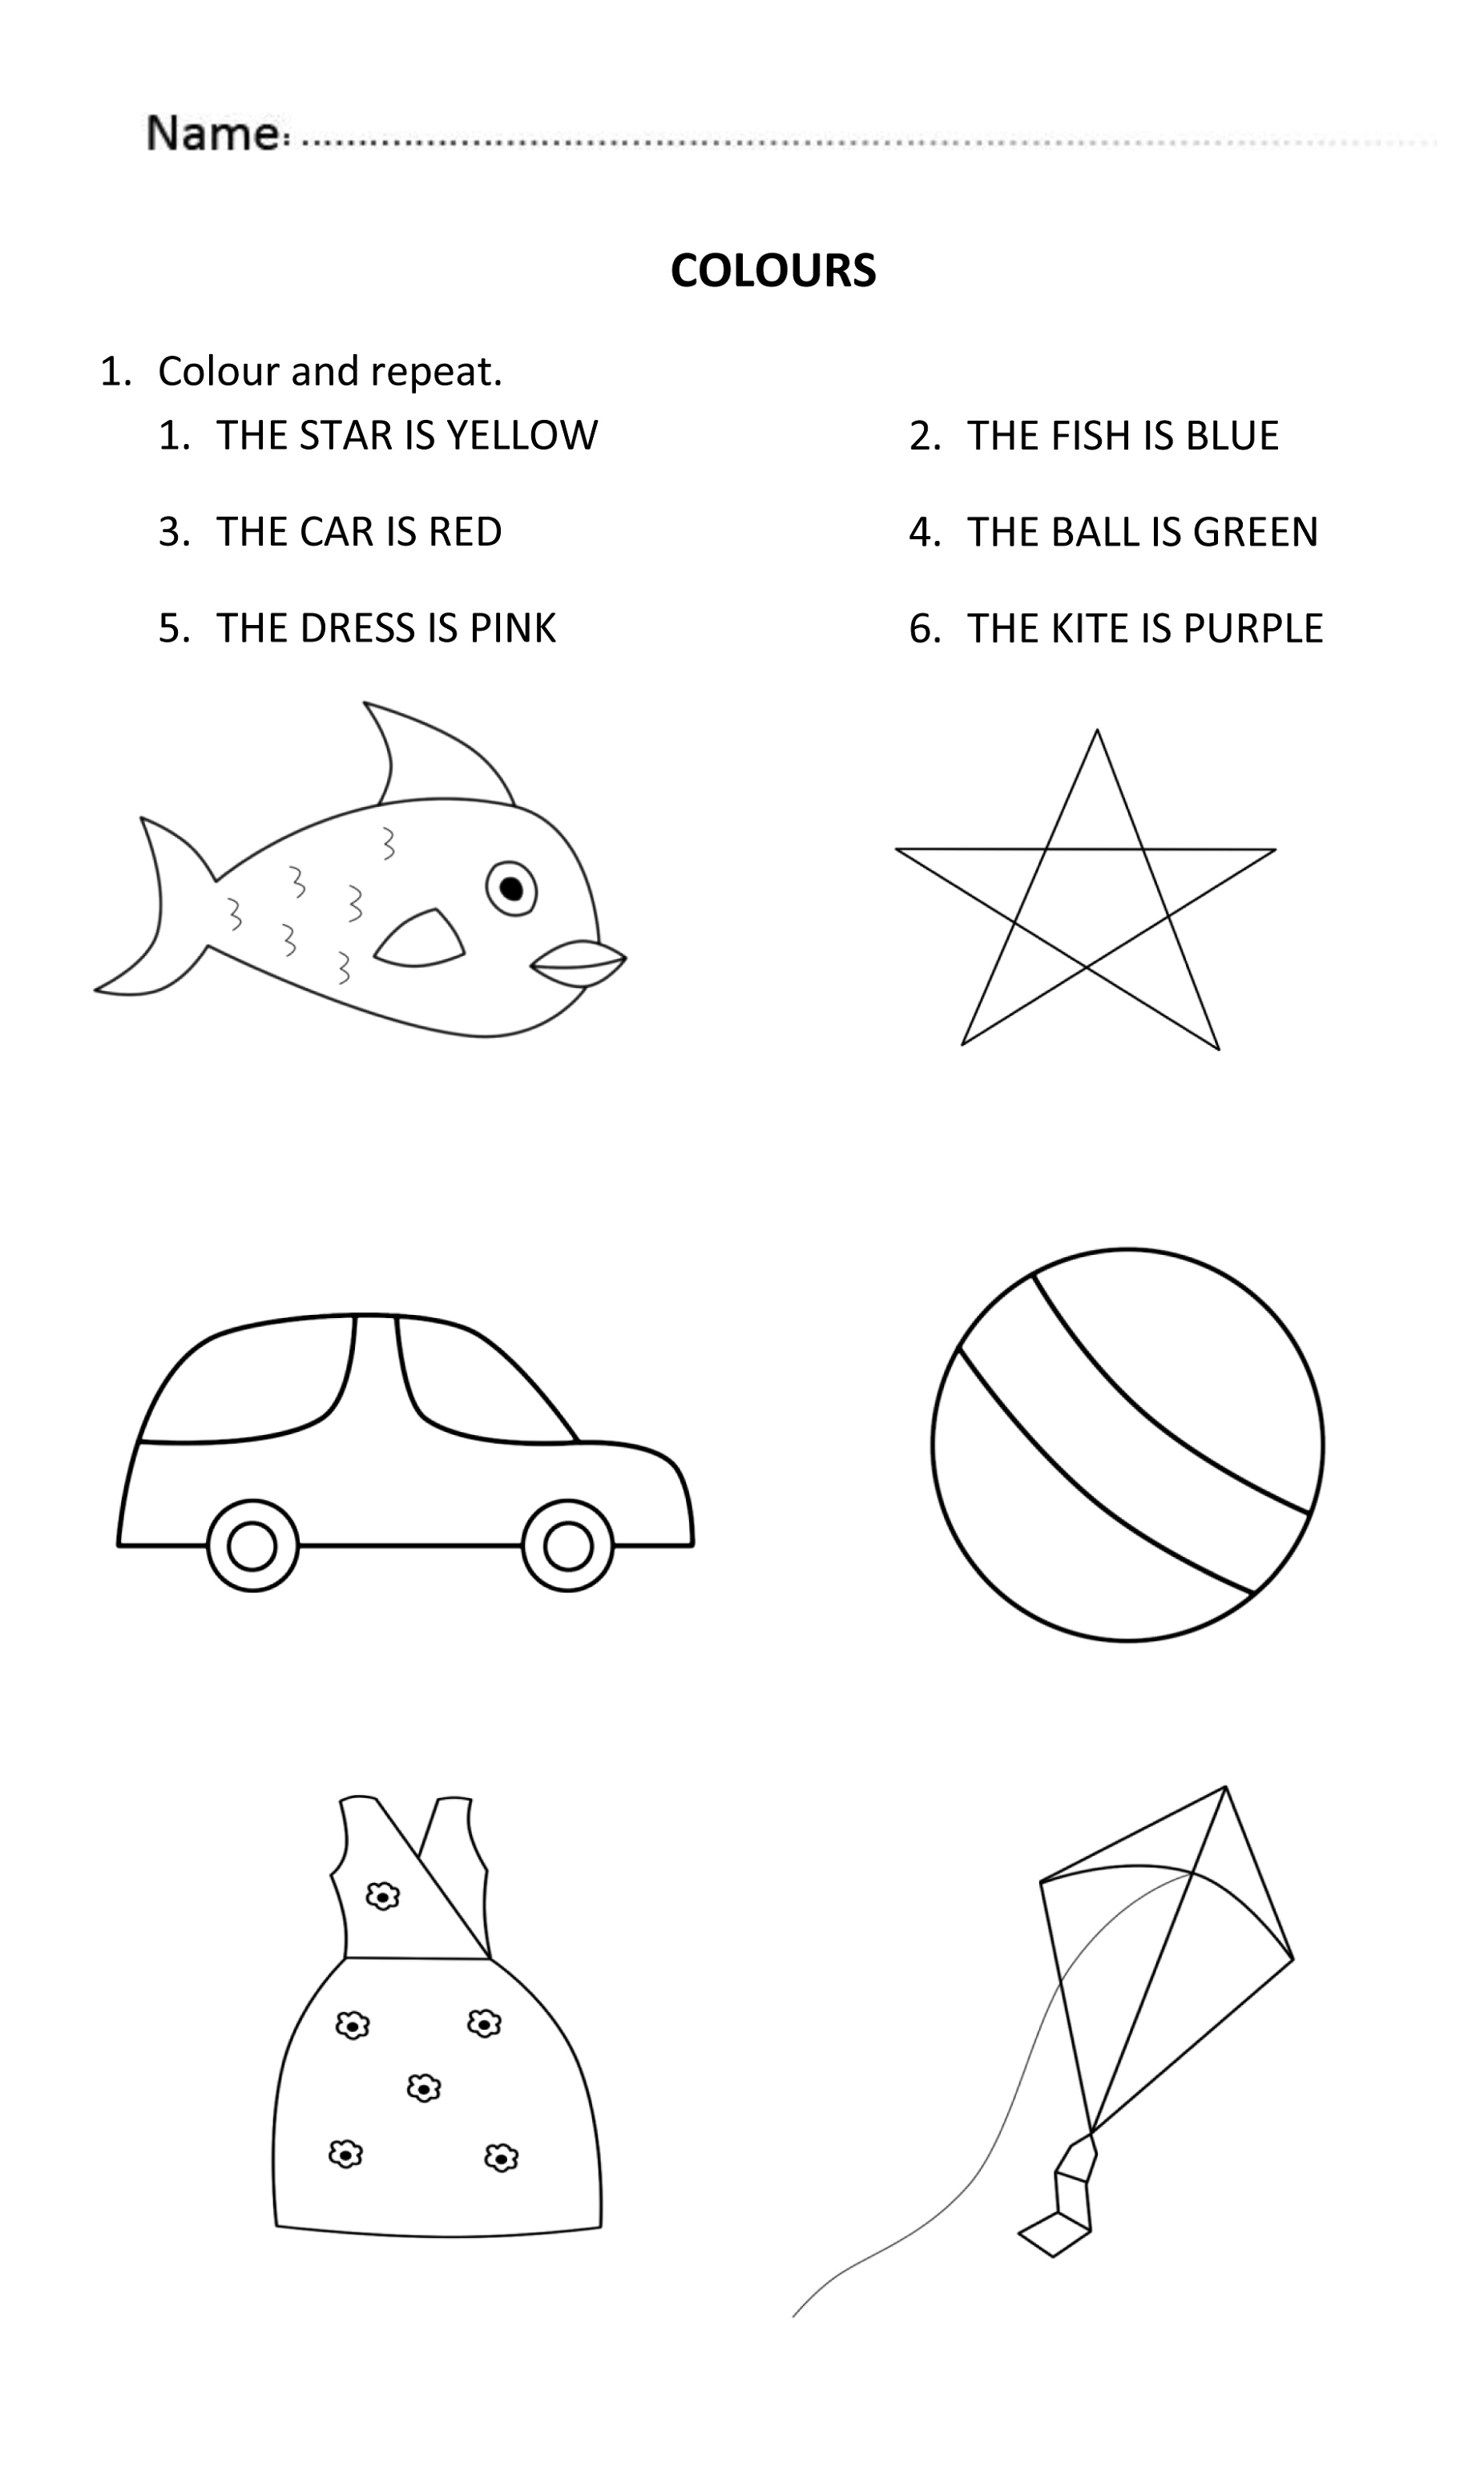 Worksheets For 6 Year Olds To Print Colours